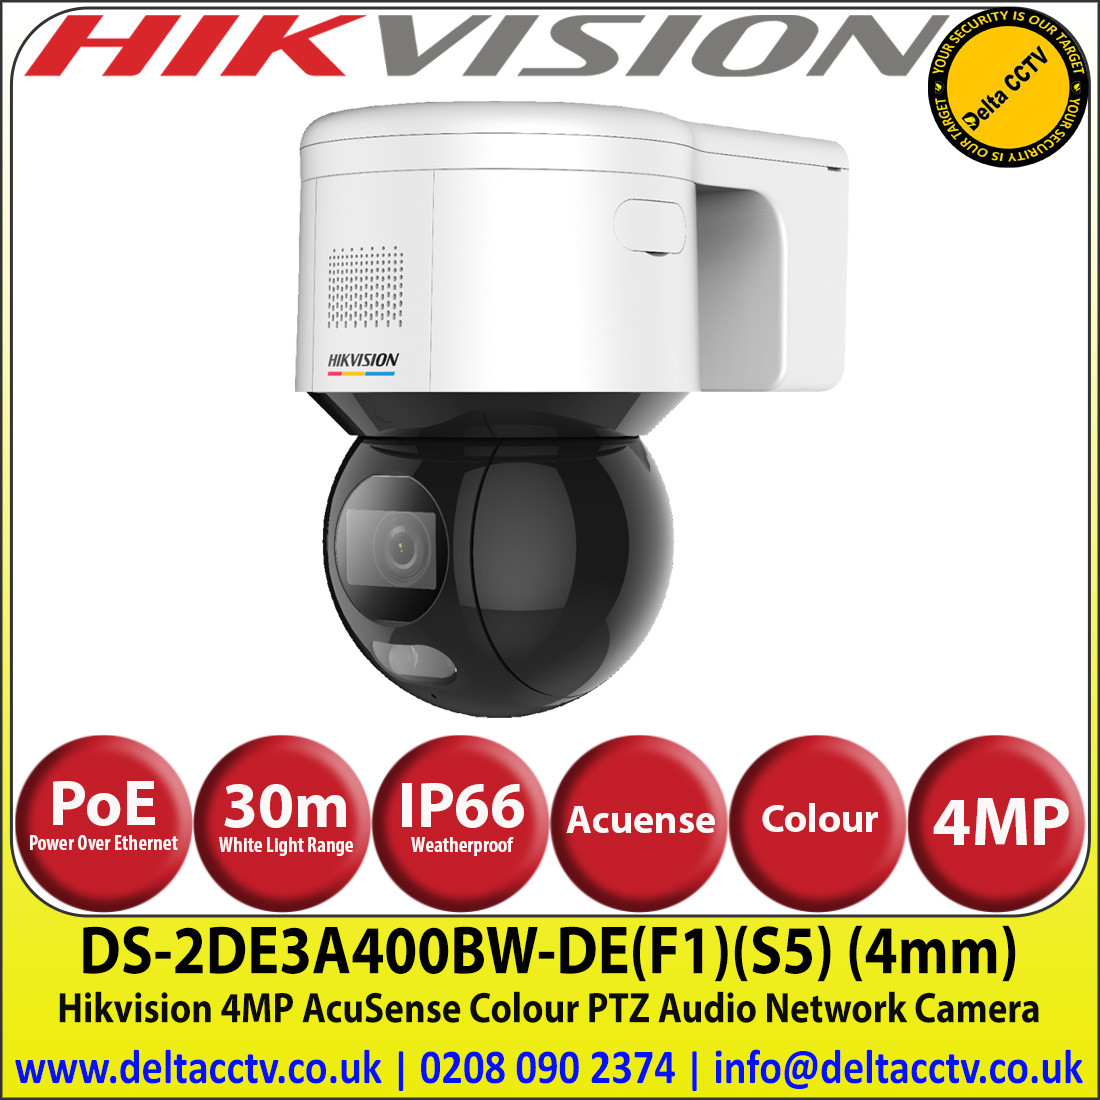 Hikvision Ds 2de3a400bw De F1 S5 4mp 4mm Fixed Lens Acusense Colour Ptz Ip Poe Network Cctv Camera 30m White Light Range Ip66 Wdr H 265 Supports On Board Storage Face Capture Built In Microphone And Speaker